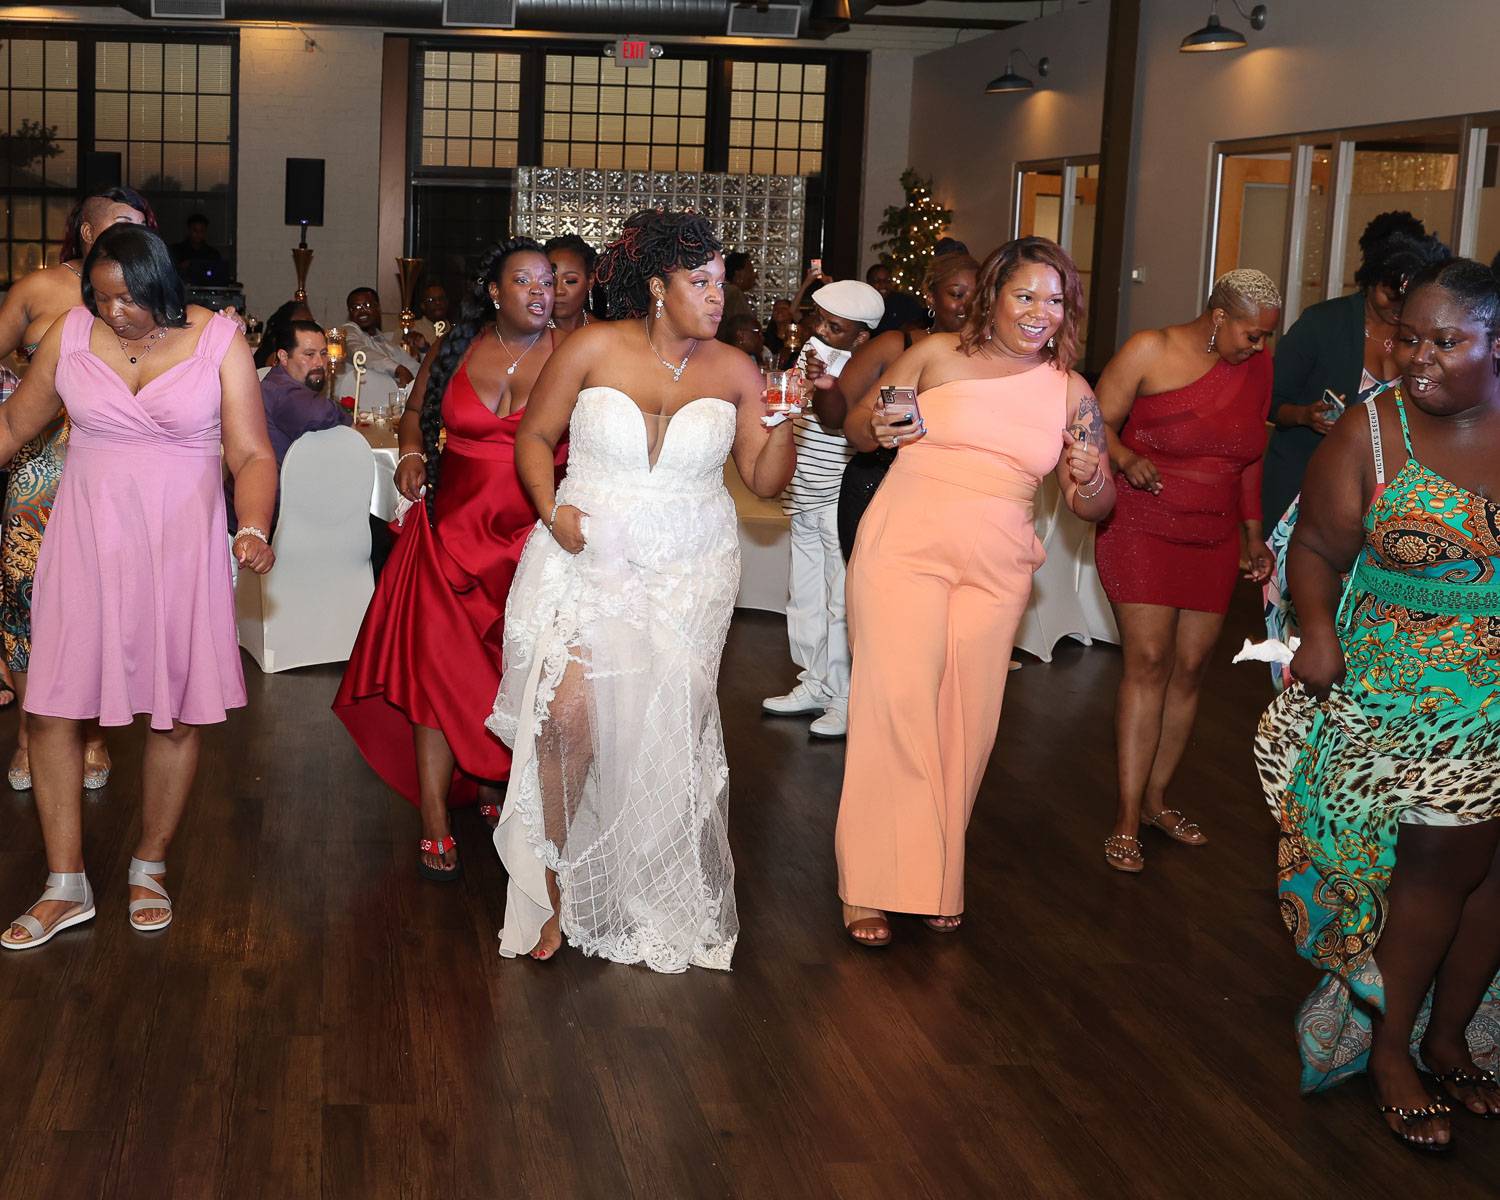 Guests and the bride dancing